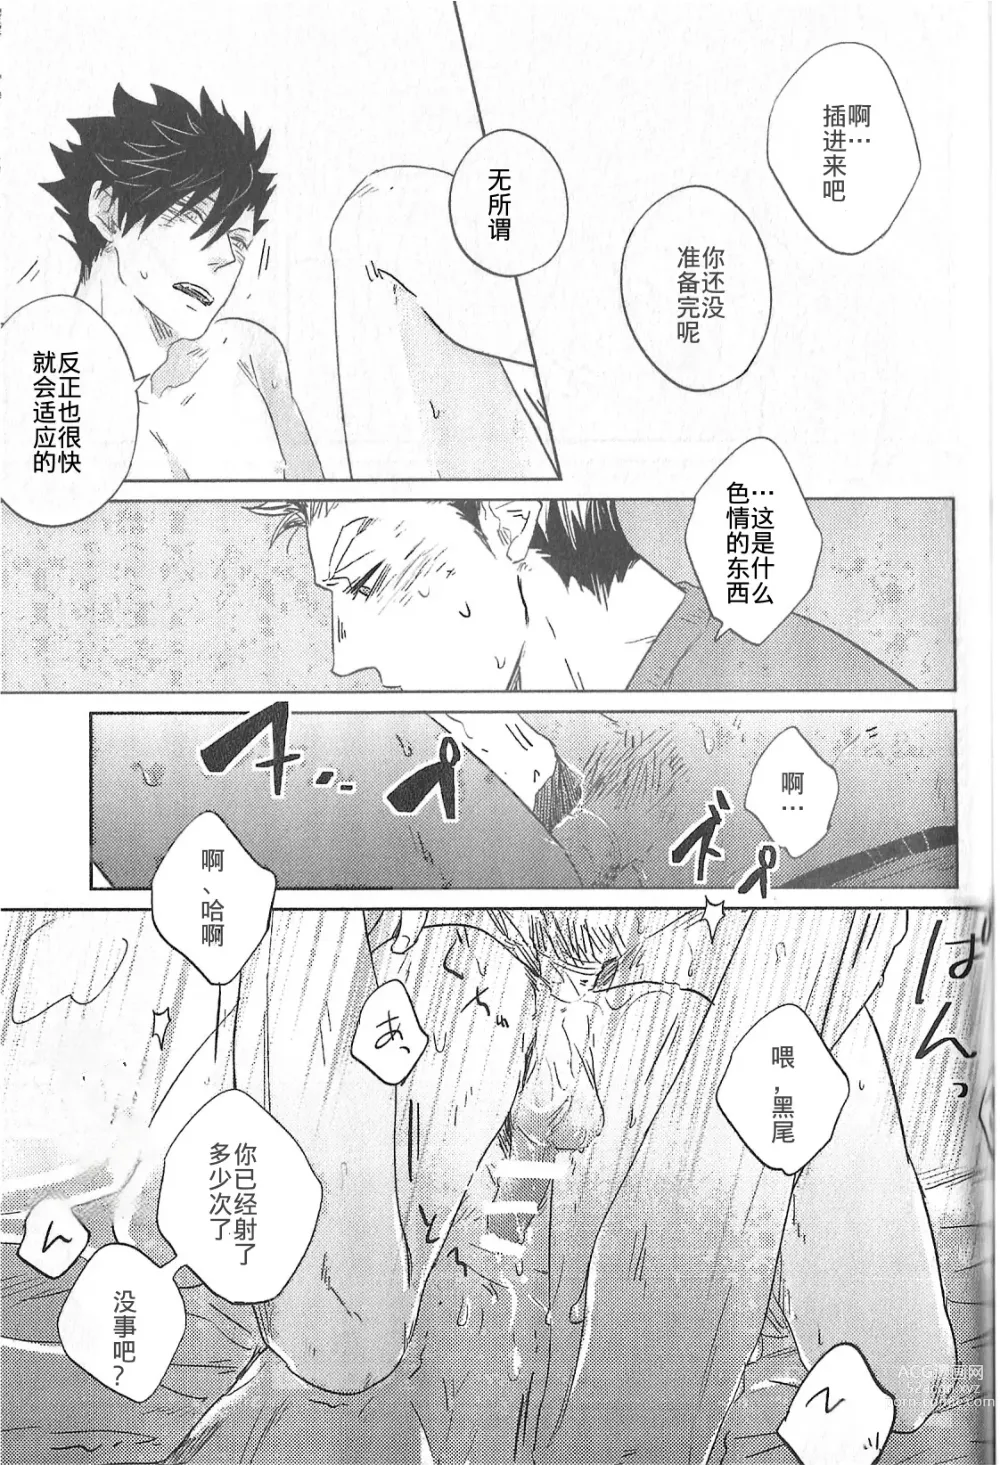 Page 8 of doujinshi 极境的野兽 后篇